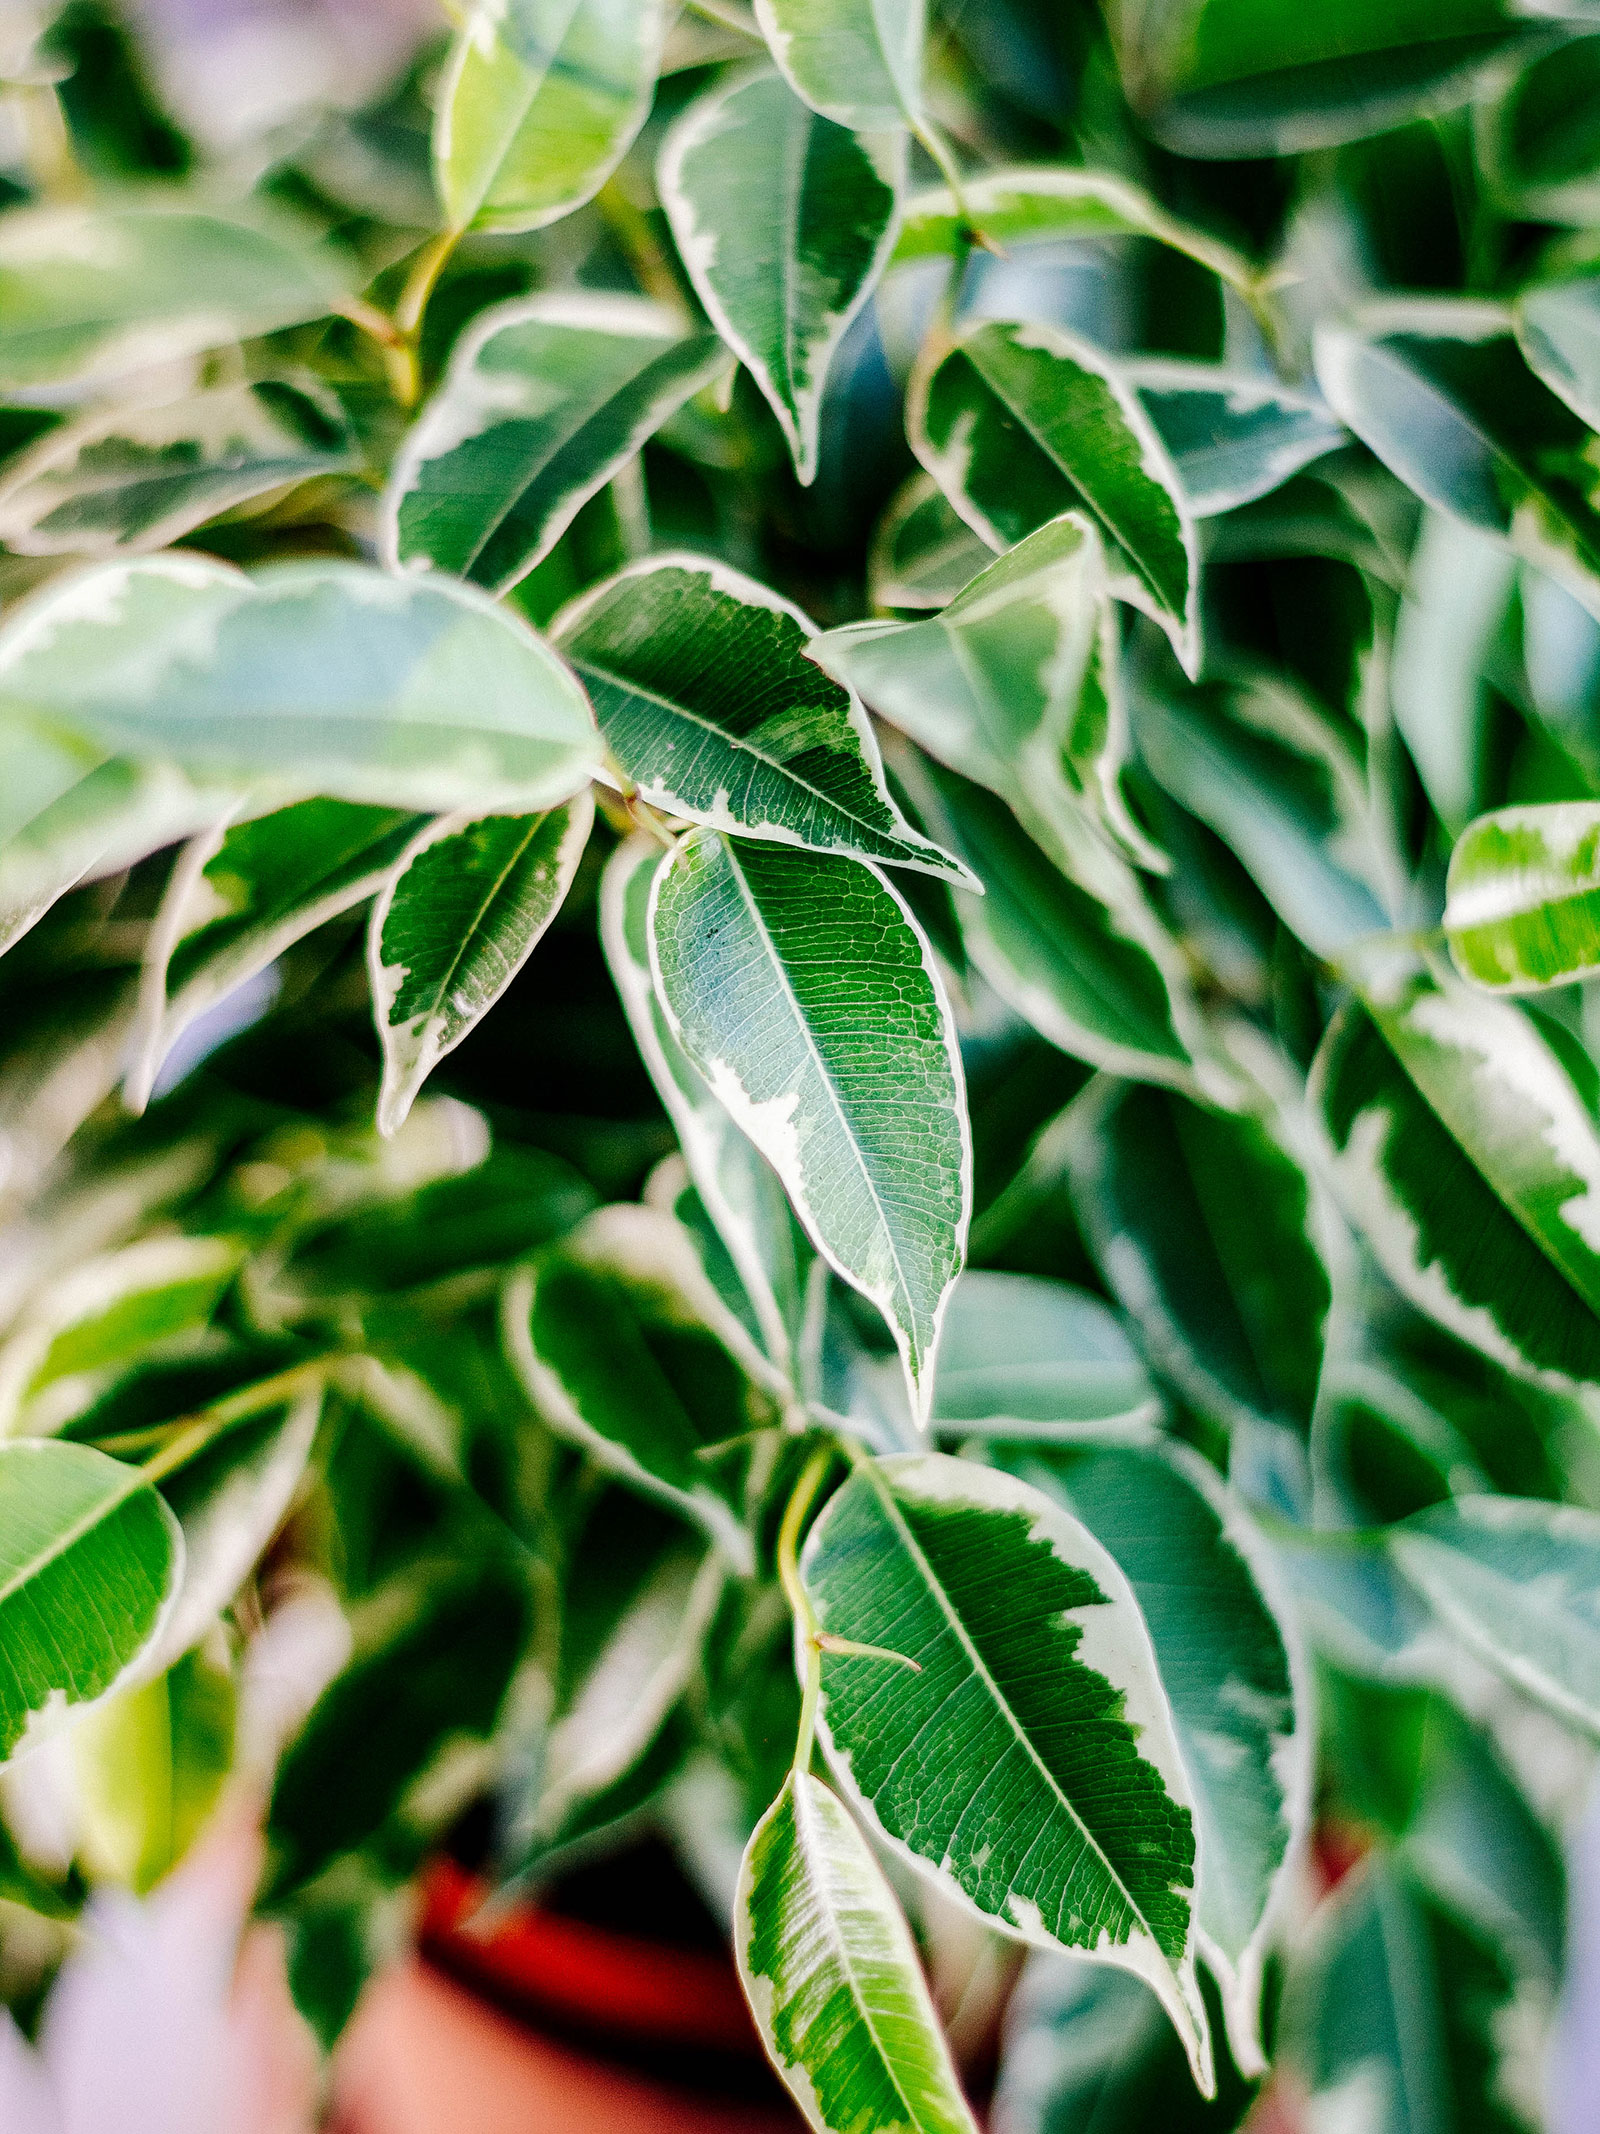 Close-up of green Ficus benjamina leaves with white margins